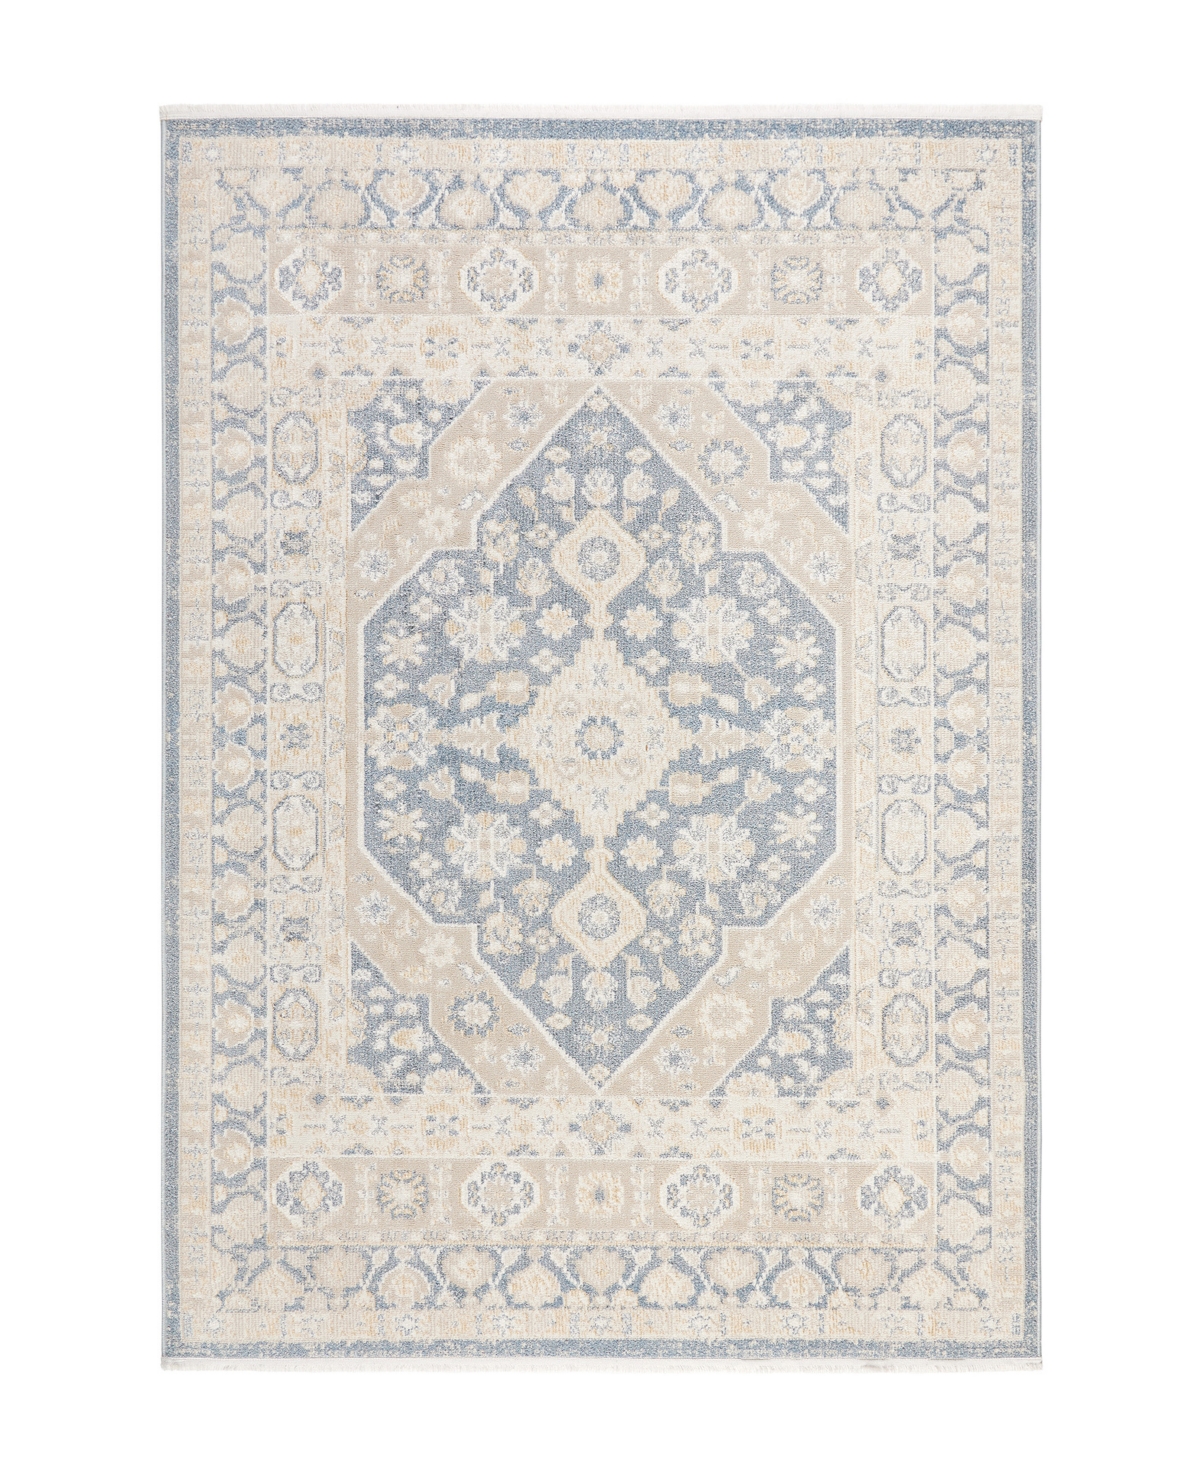 Town & Country Living Everyday Rein Everwash 17 5'2" X 7'2" Area Rug In Blue,beige